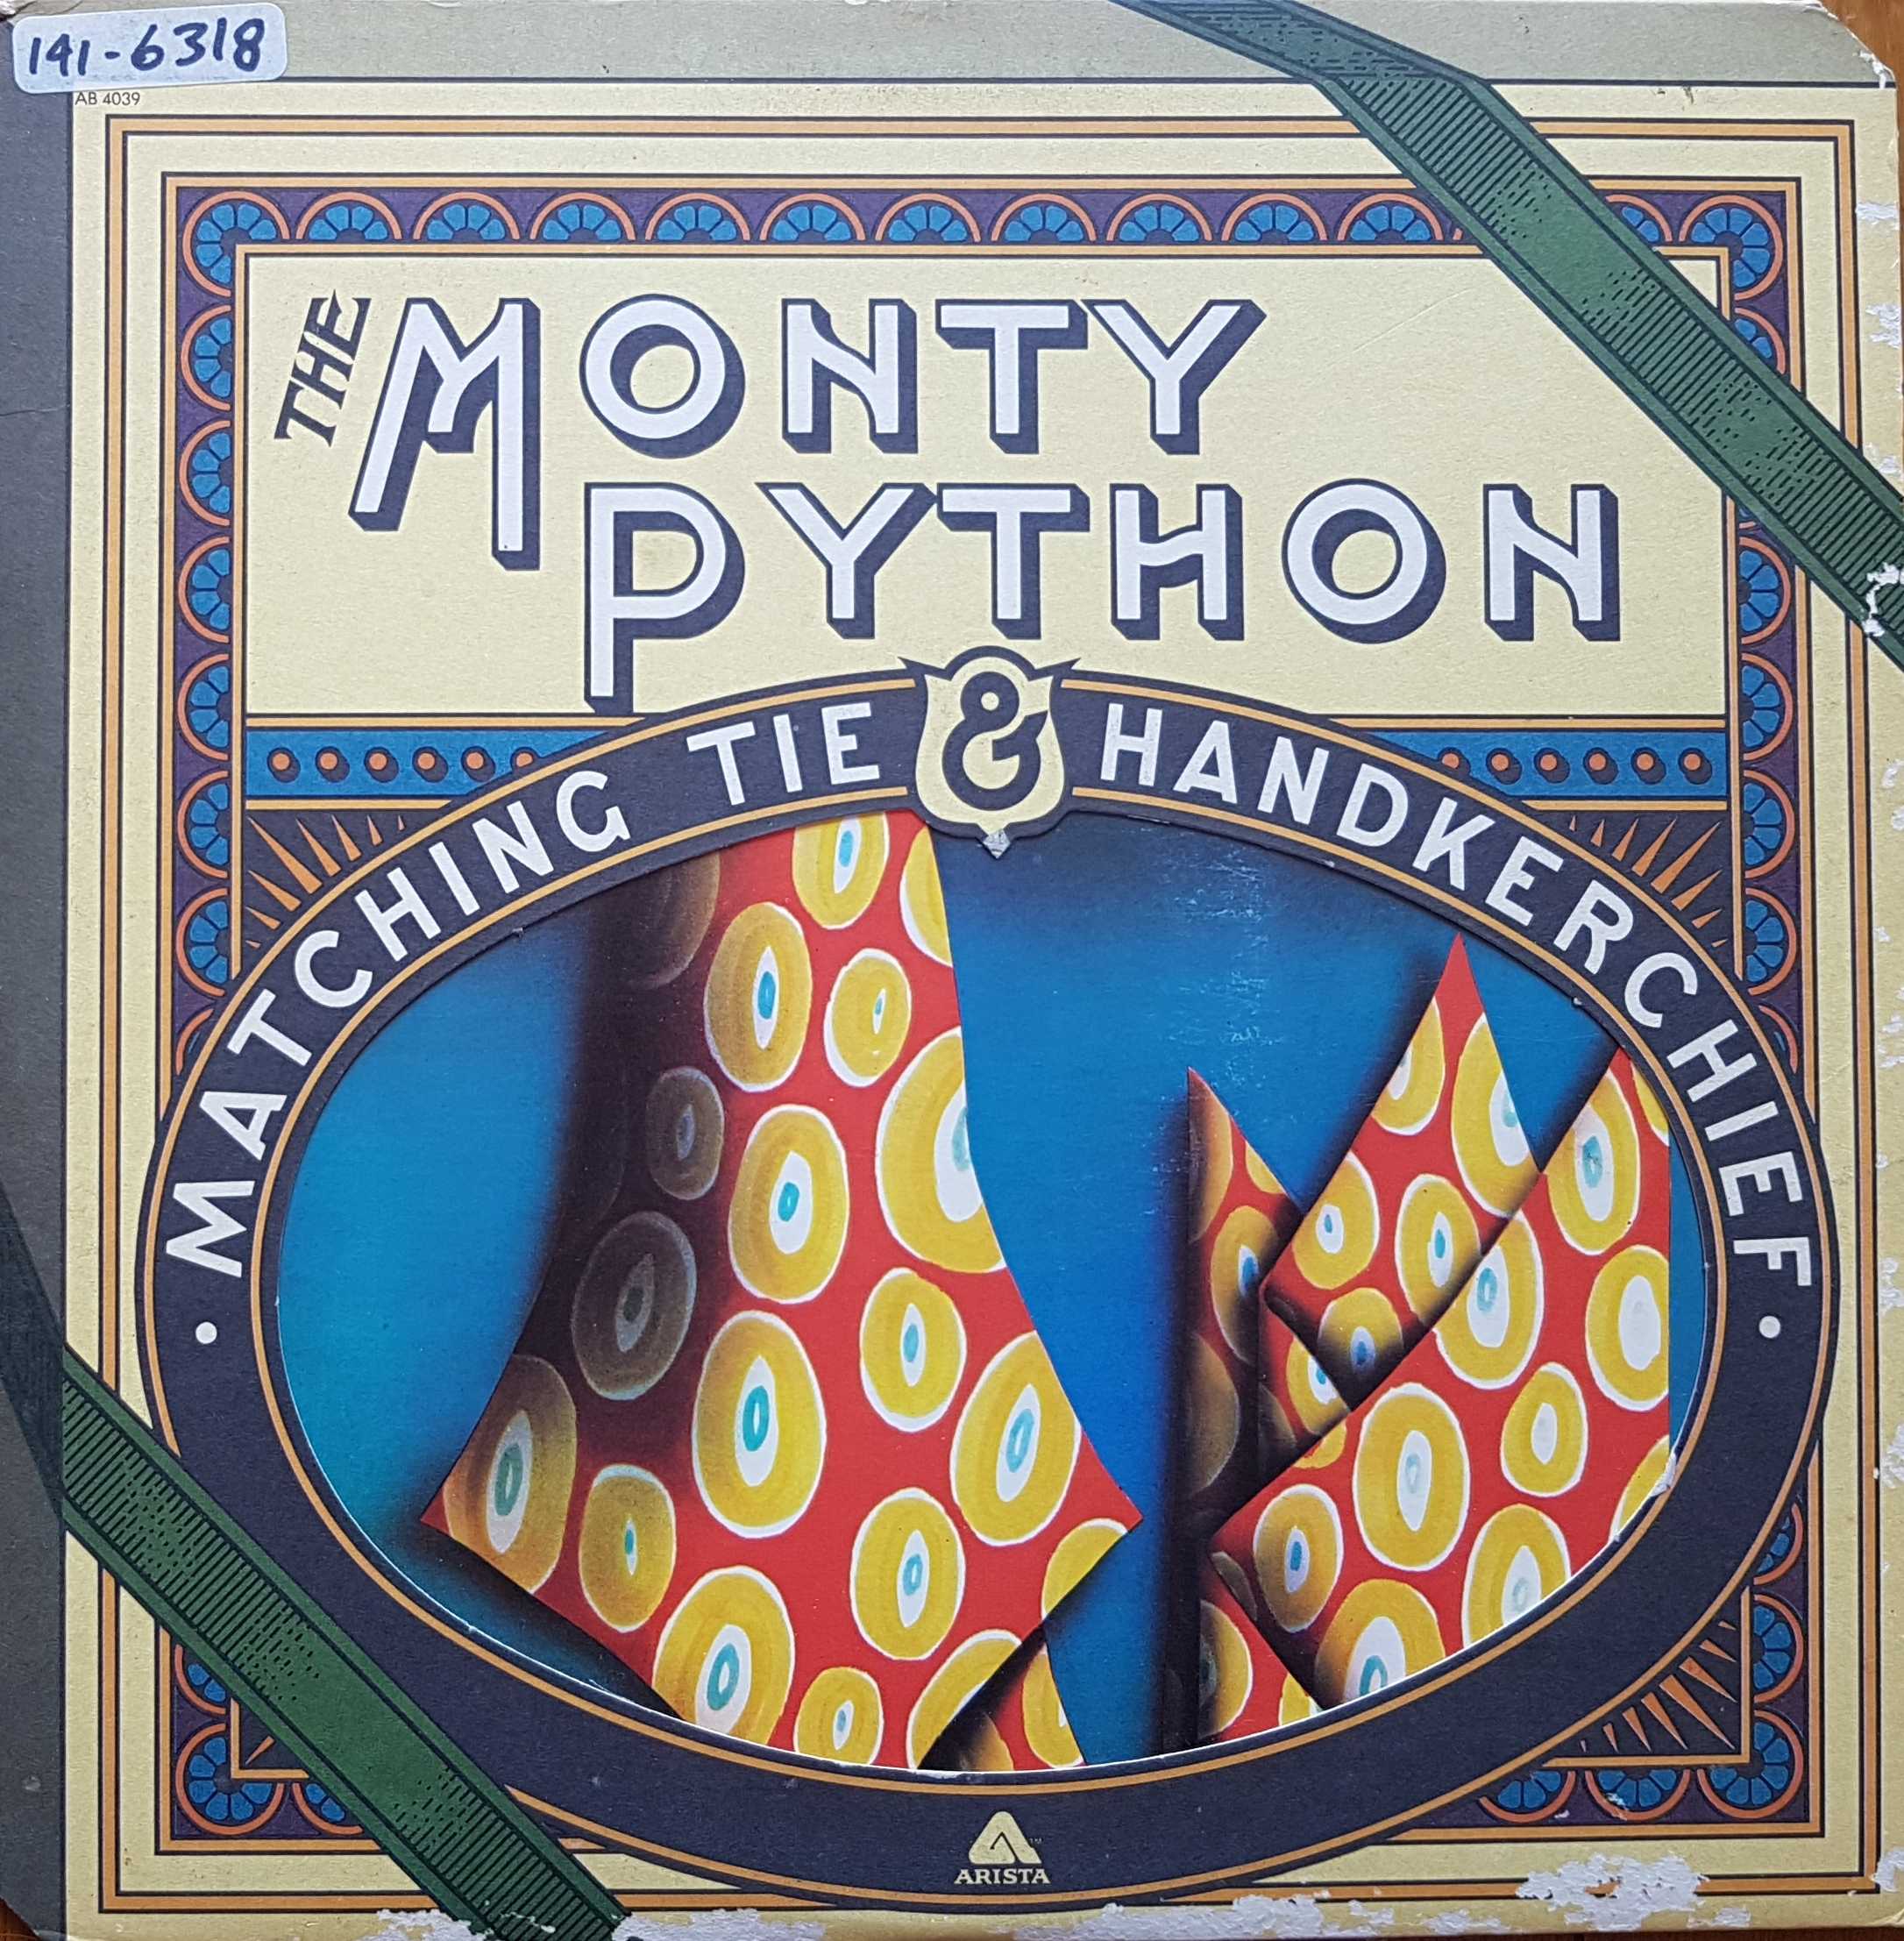 Picture of Matching tie & hankerchief by artist Monty Python from the BBC albums - Records and Tapes library